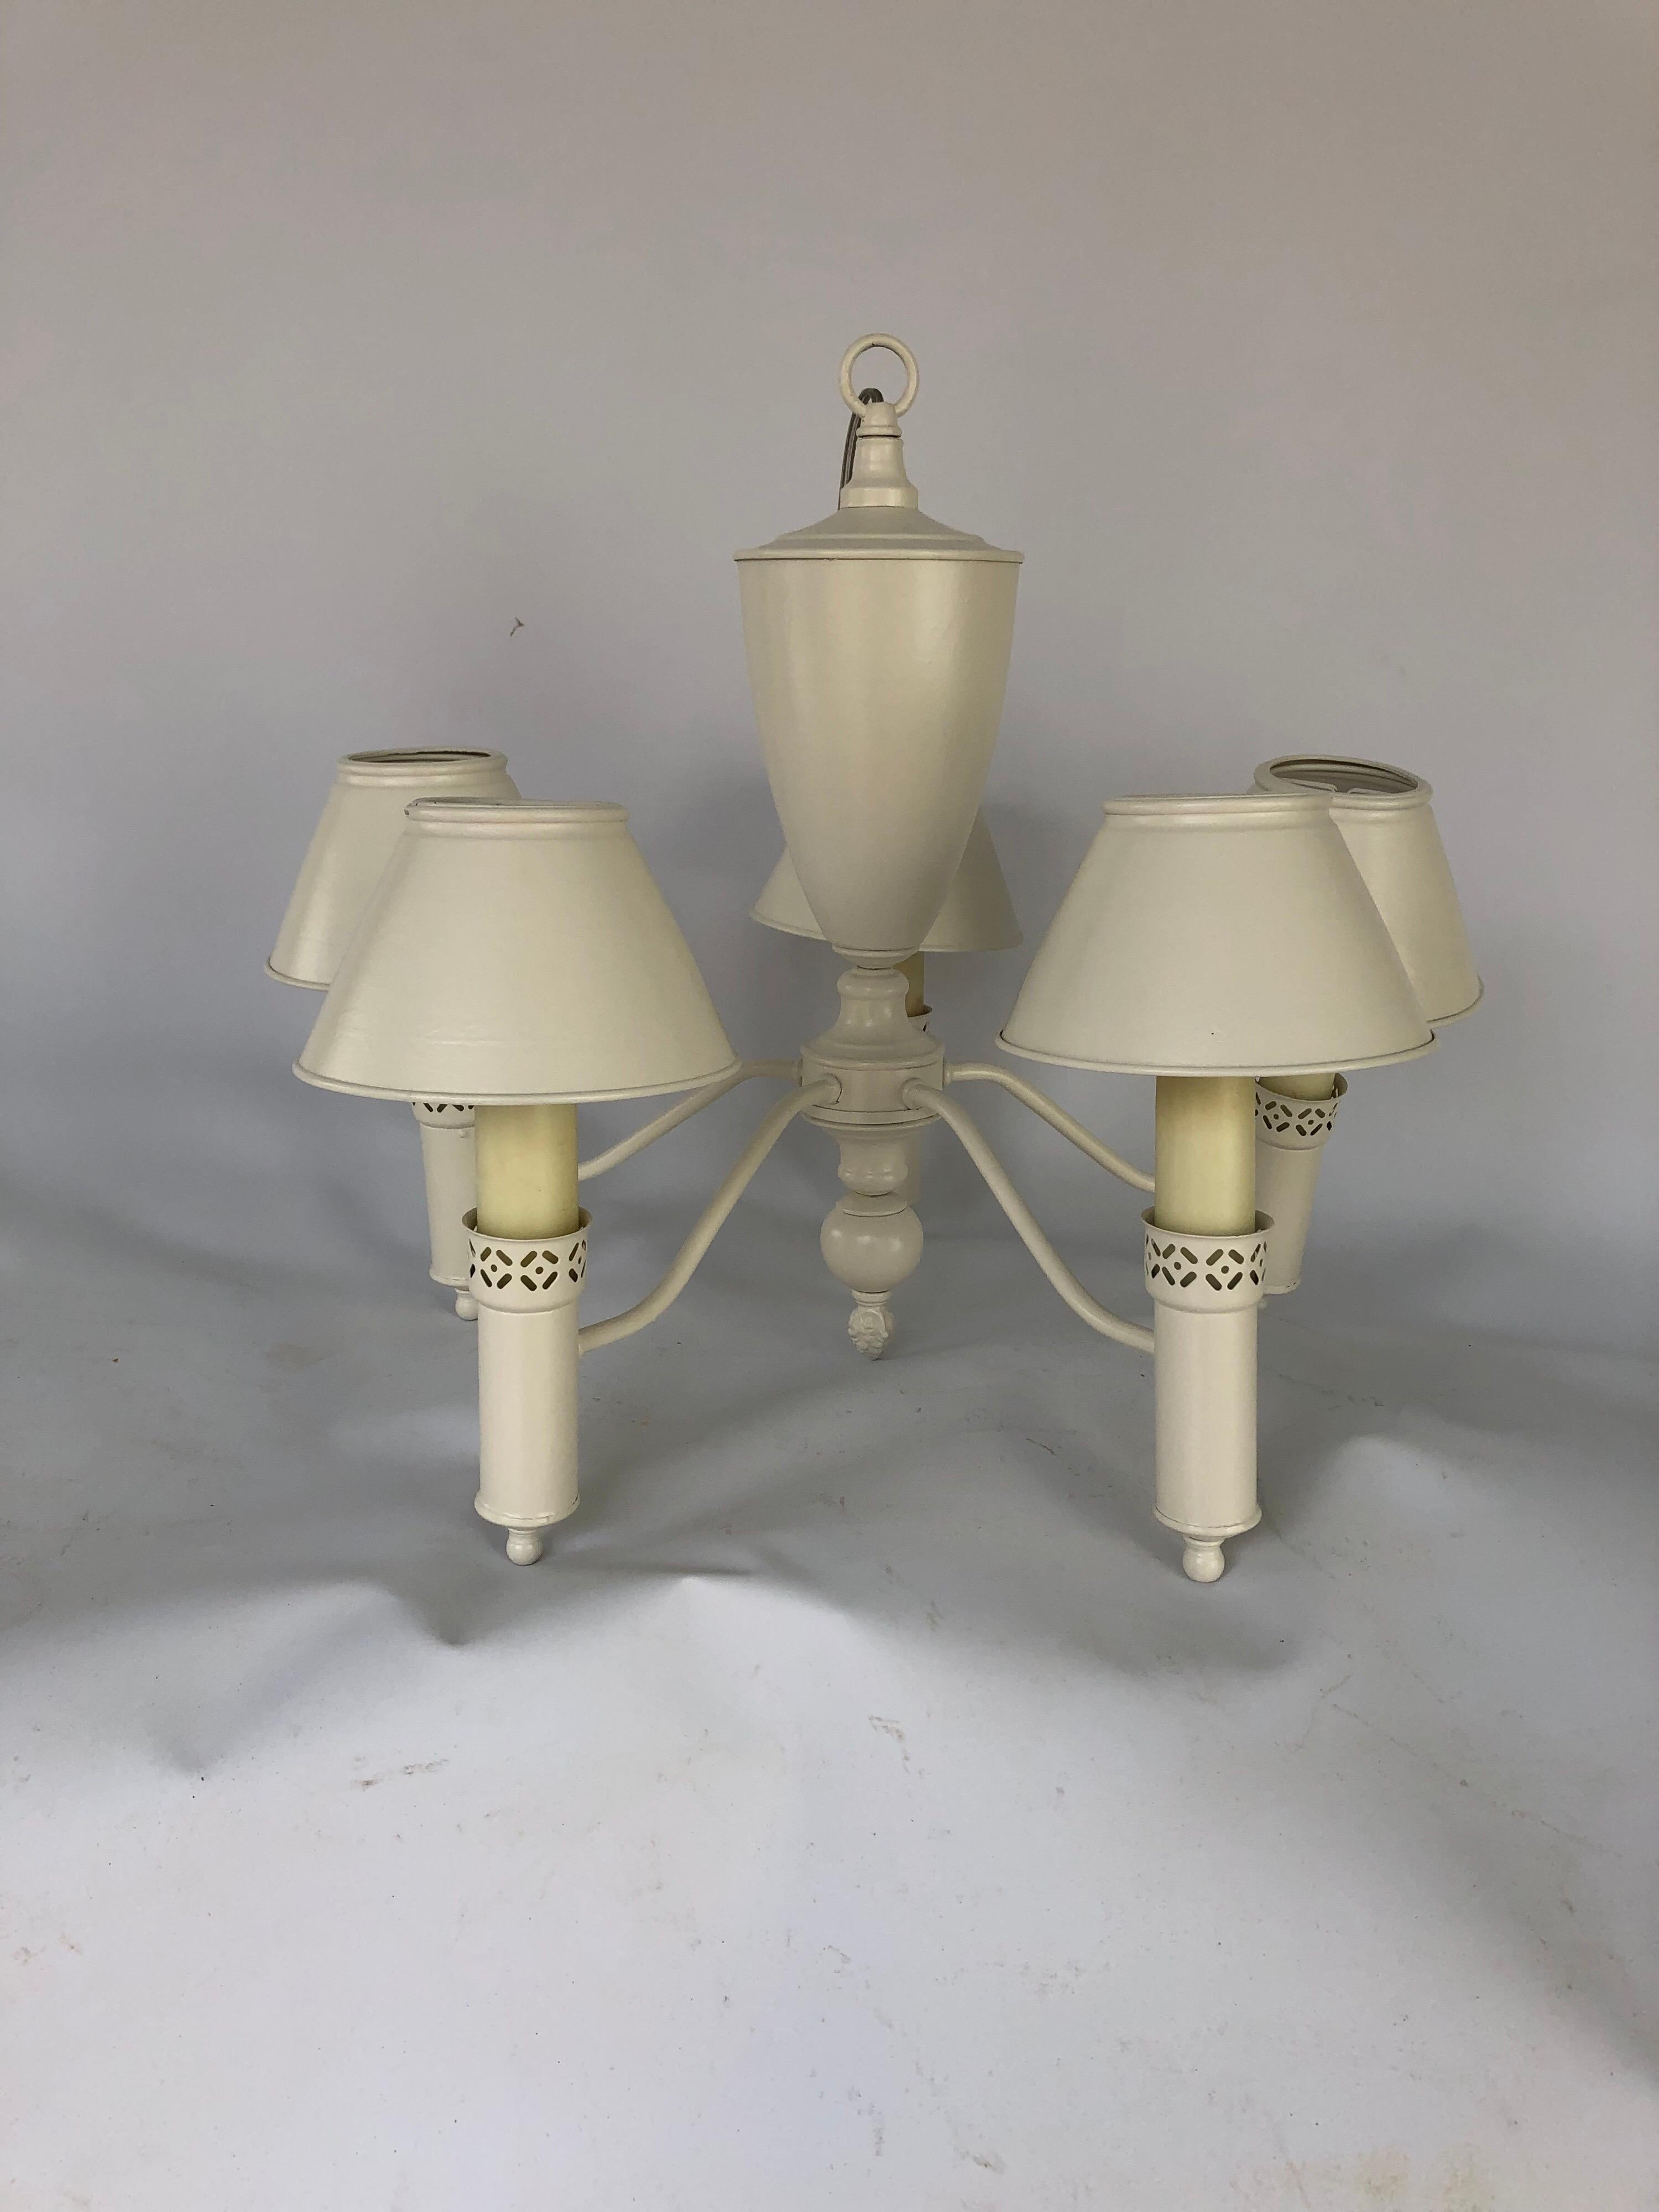 Contemporary Regency style five-light tole chandelier. Tole shades. Newly
painted China white and new wiring. Ready to hang.